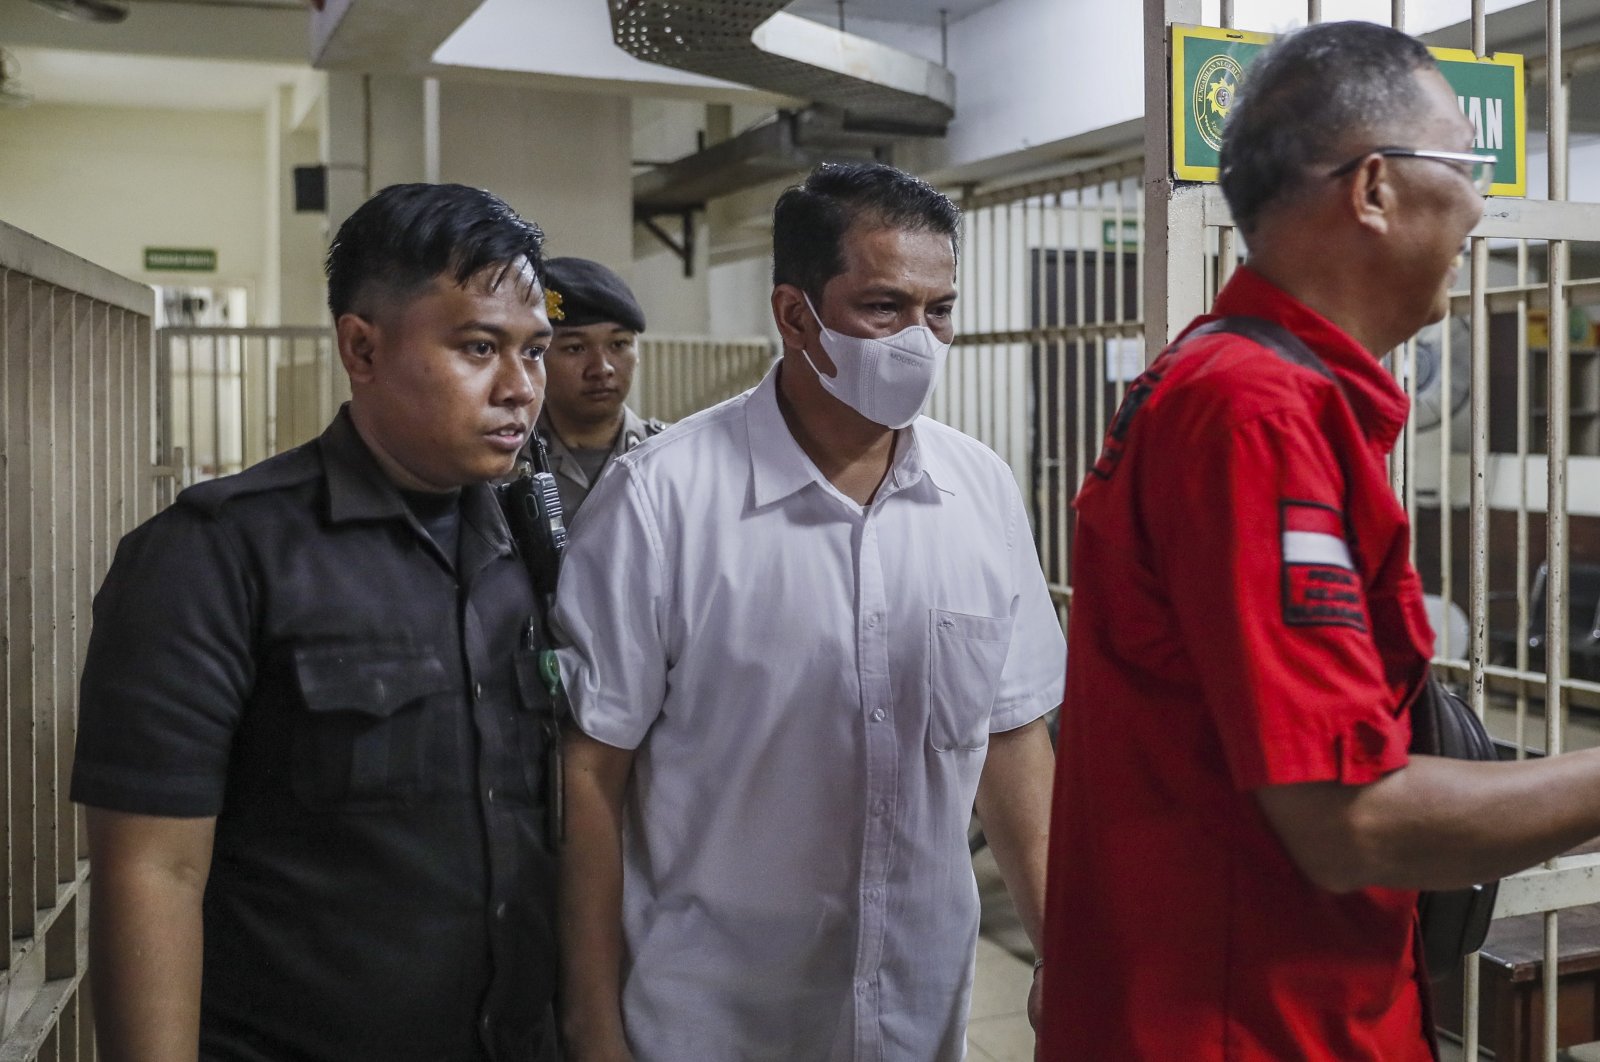 Defendant of the Kanjuruhan stadium stampede case, police officer Hasdarmawan (C) is escorted to a court room for his verdict trial at the Surabaya district court, Surabaya, Indonesia, March 16, 2023. (EPA Photo)